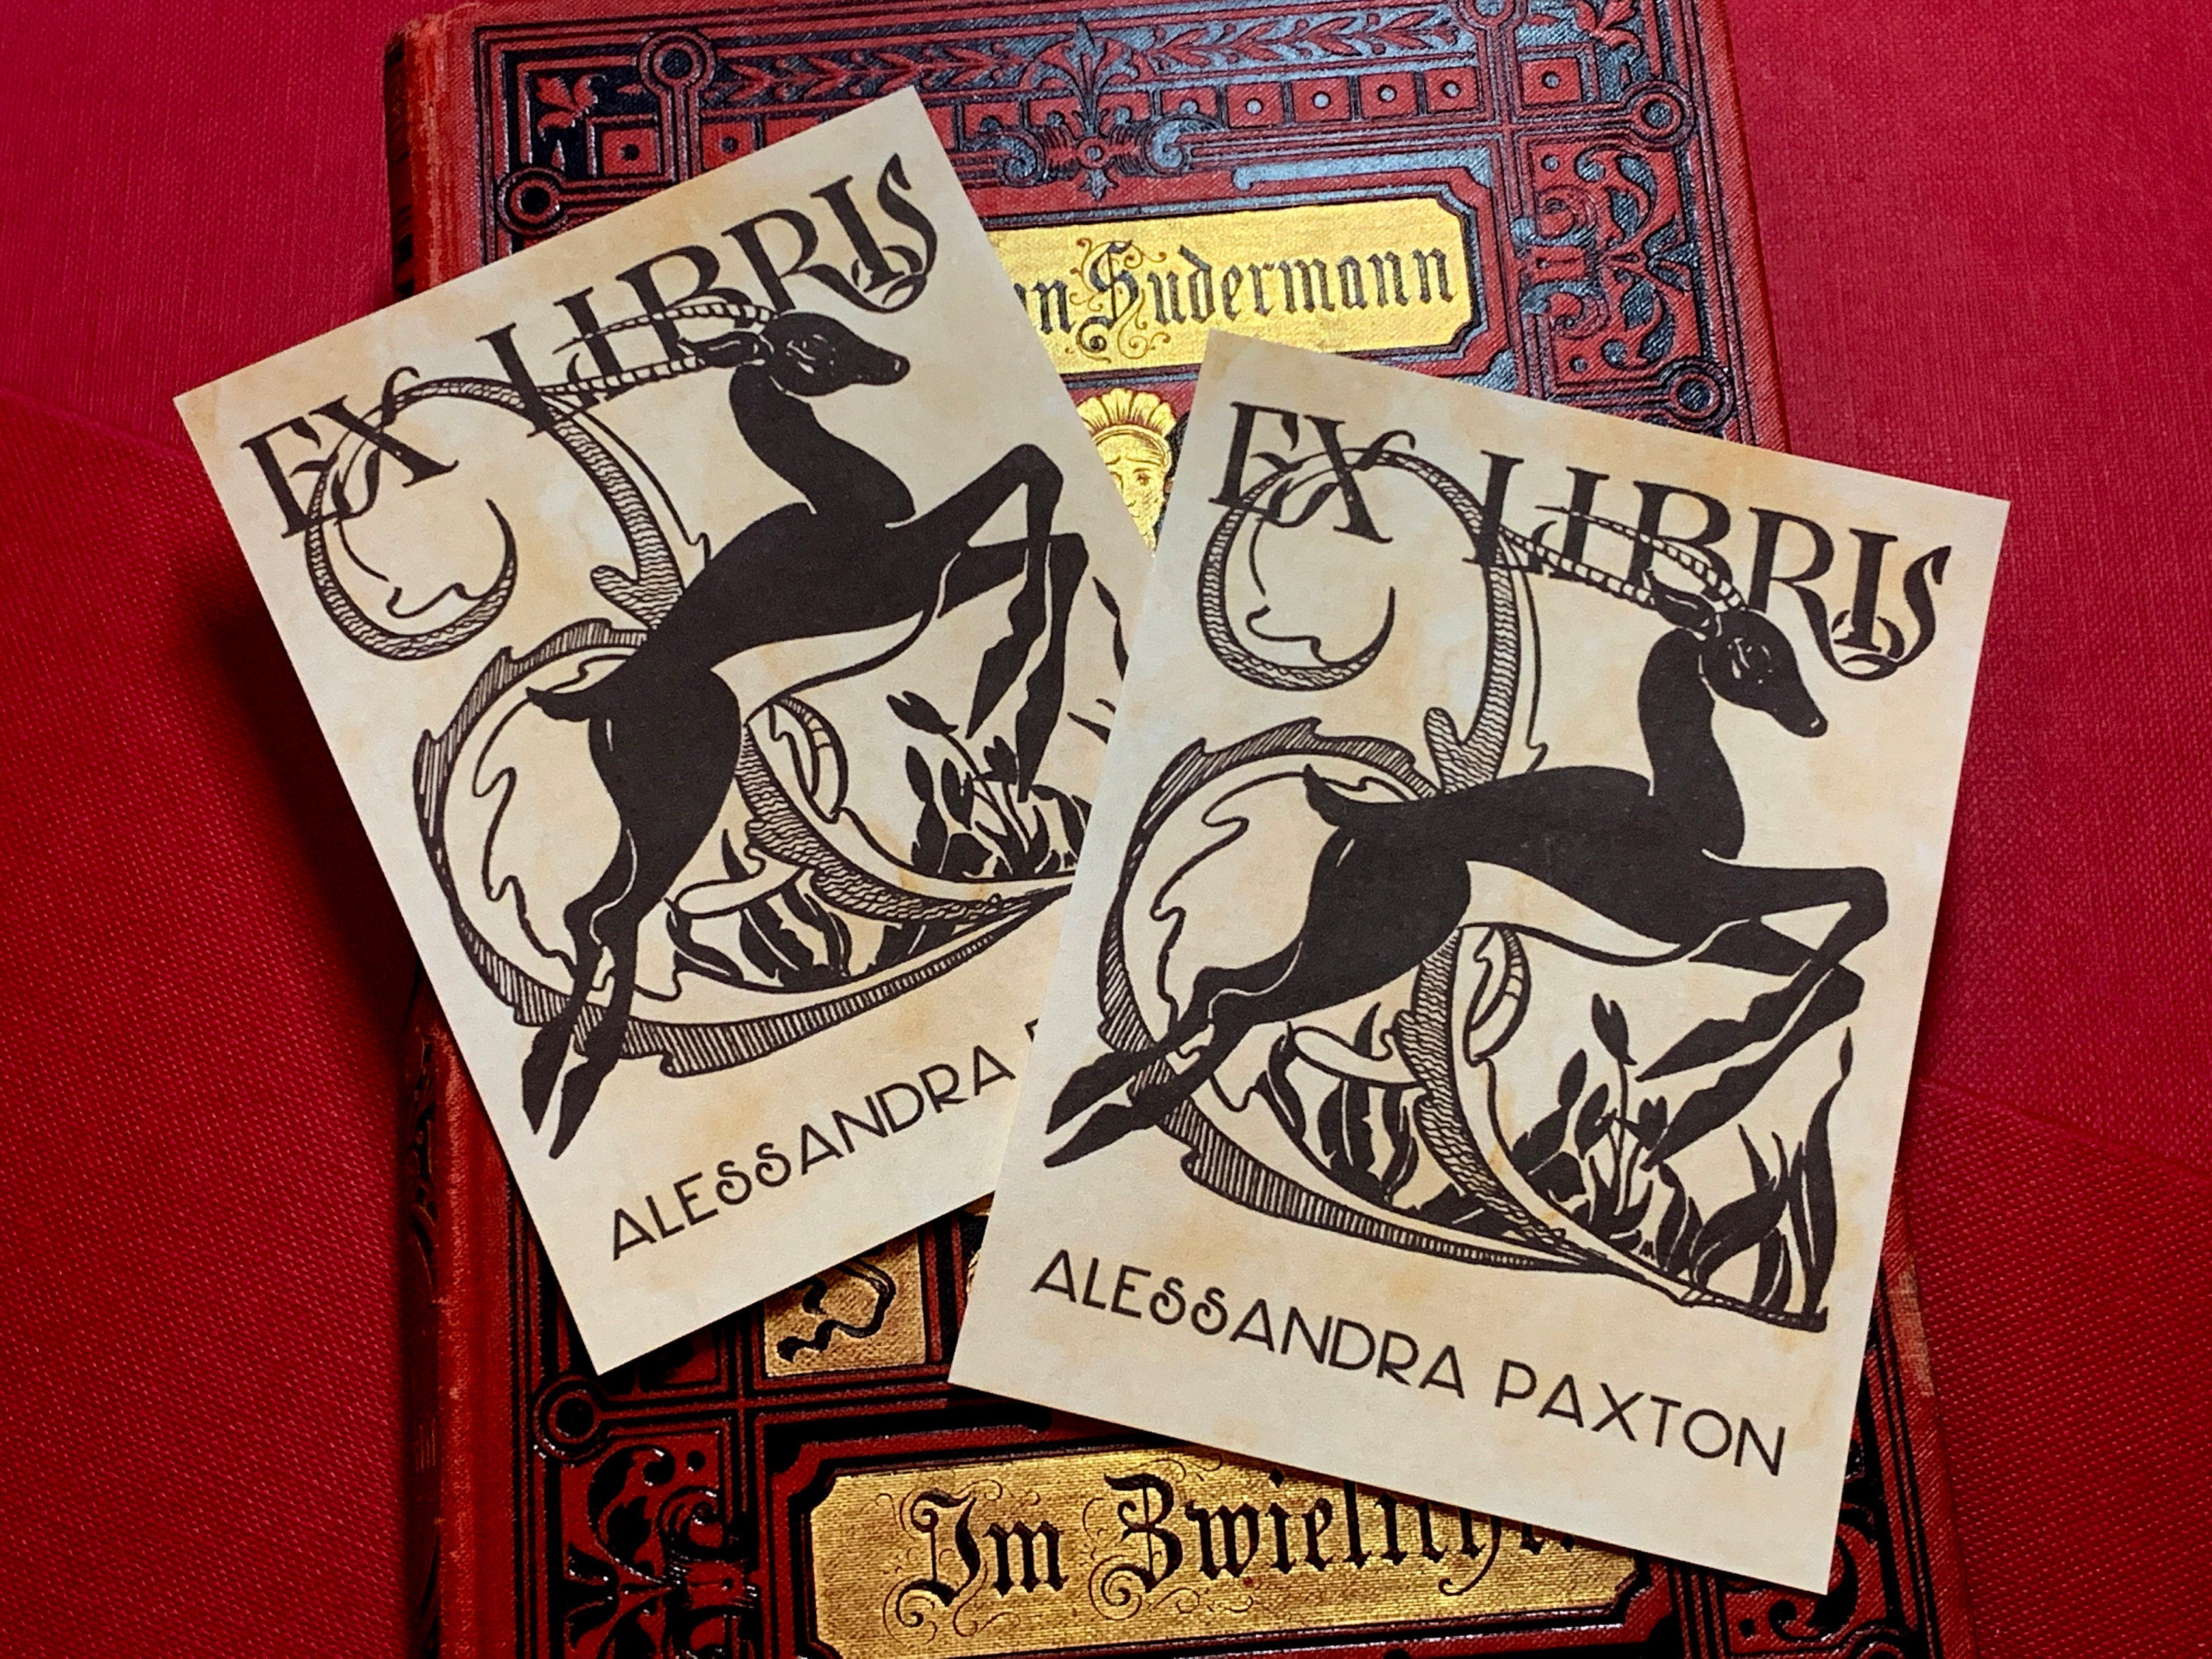 Prancing Antelope, Personalized Art Deco Ex-Libris Bookplates, Crafted on Traditional Gummed Paper, 3in x 4in, Set of 30